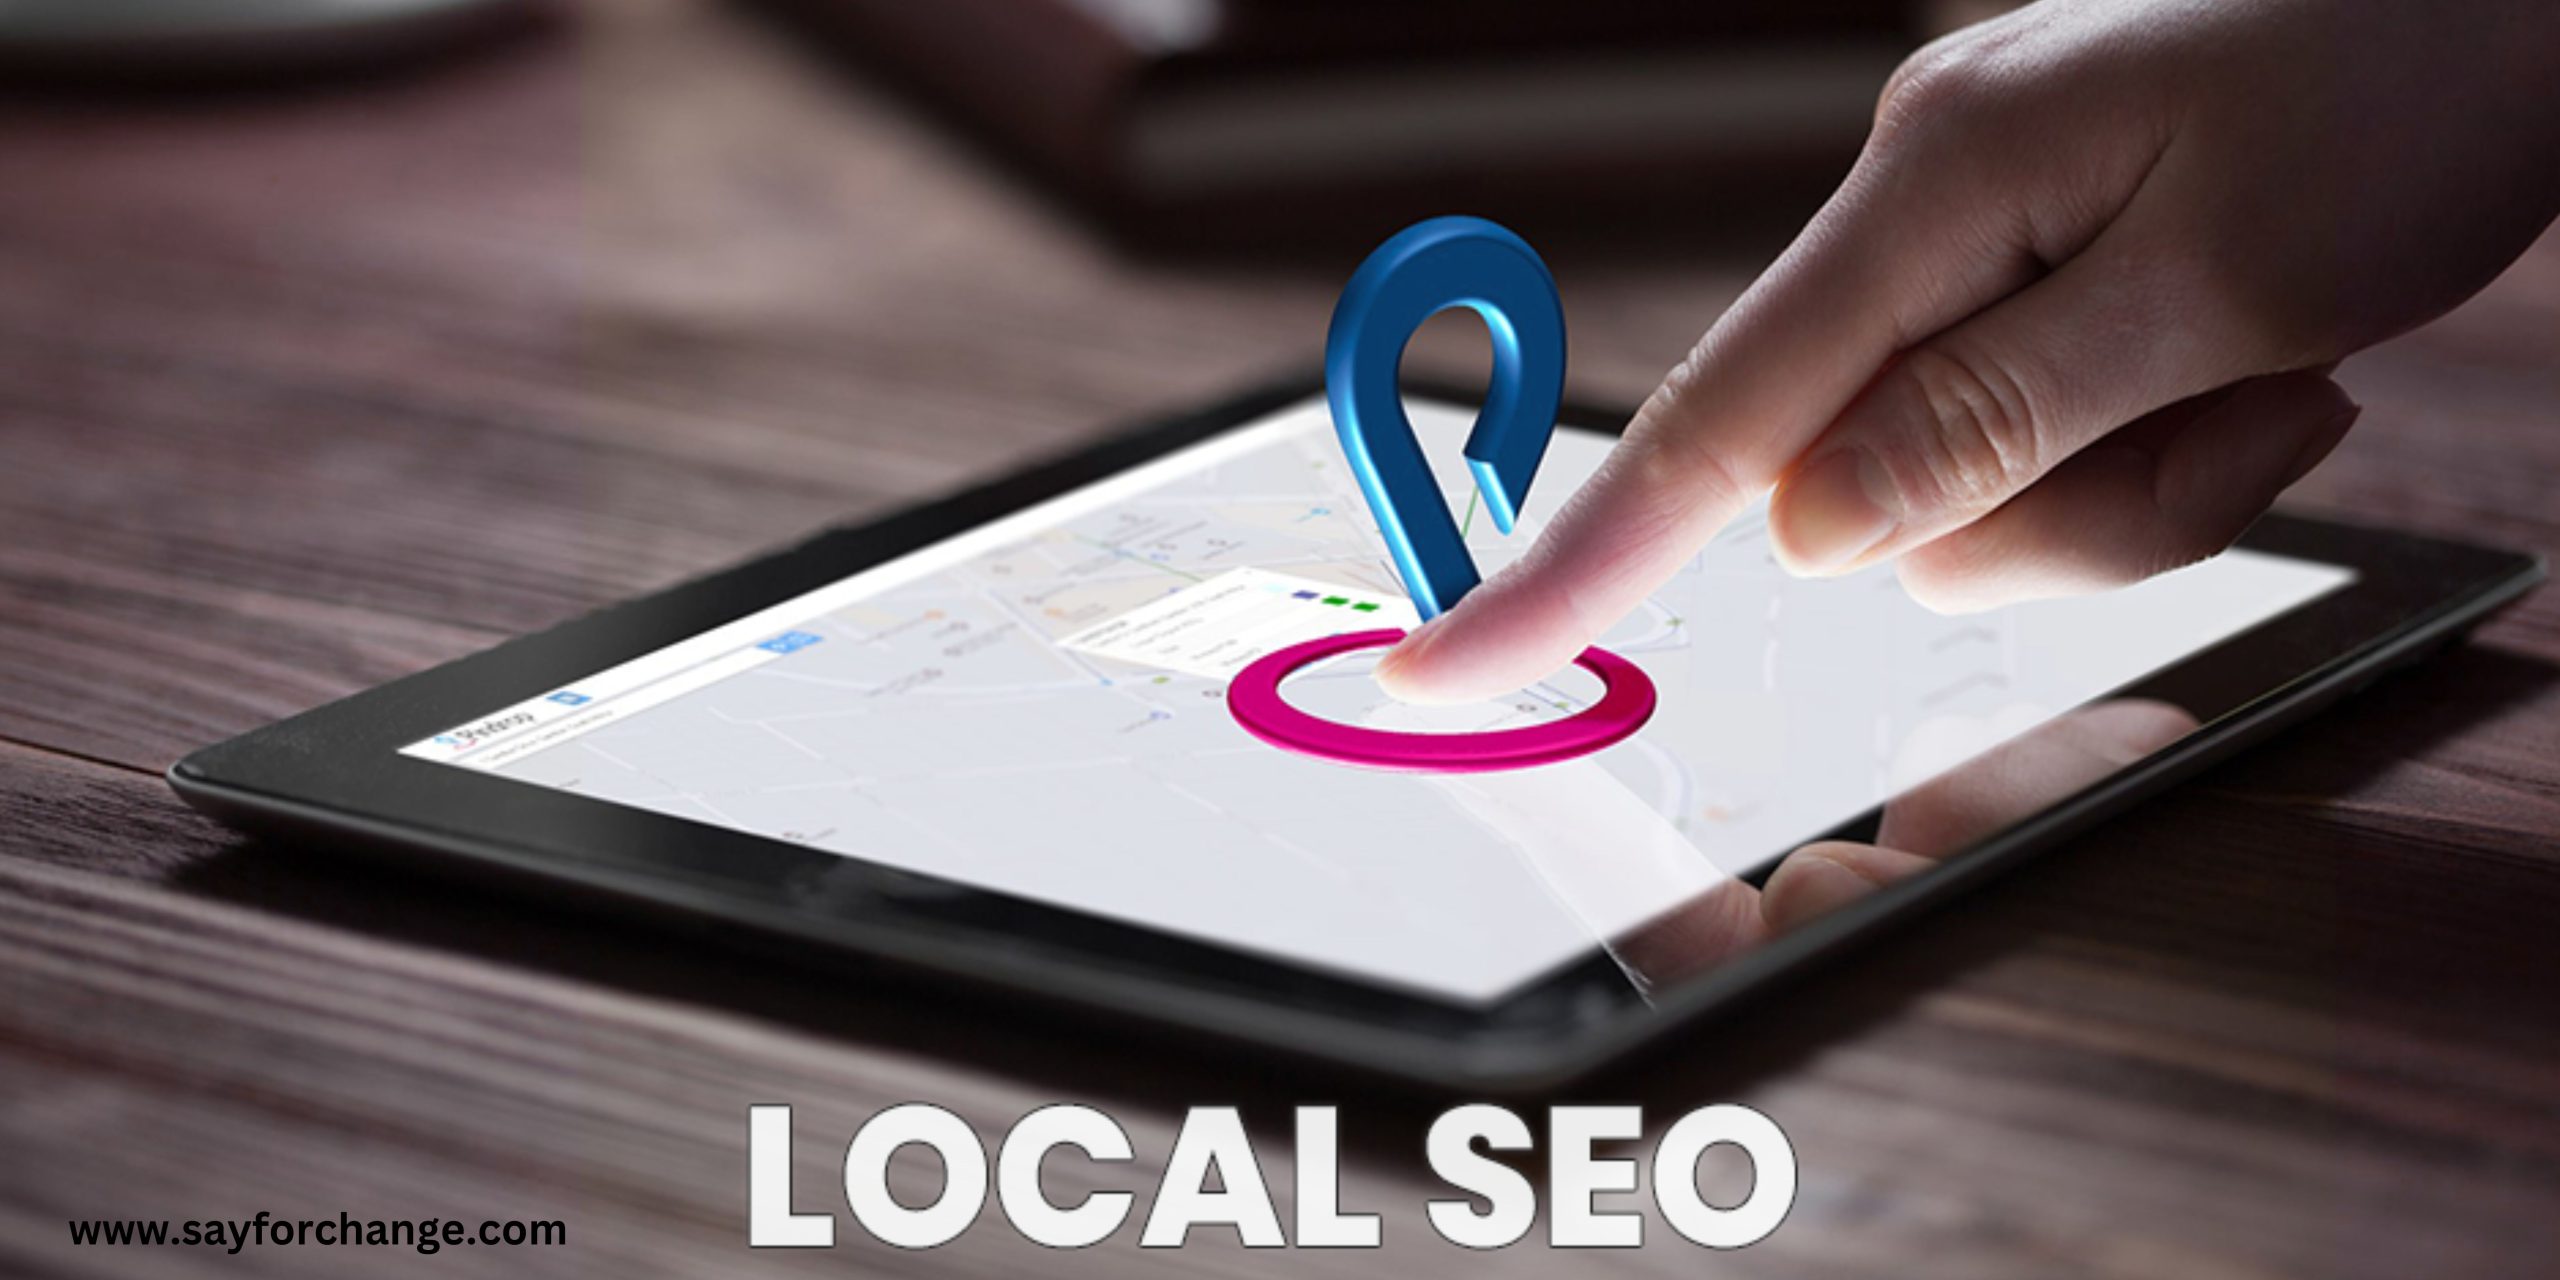 Learn to Improve Your Business’s Online Presence with Local SEO.